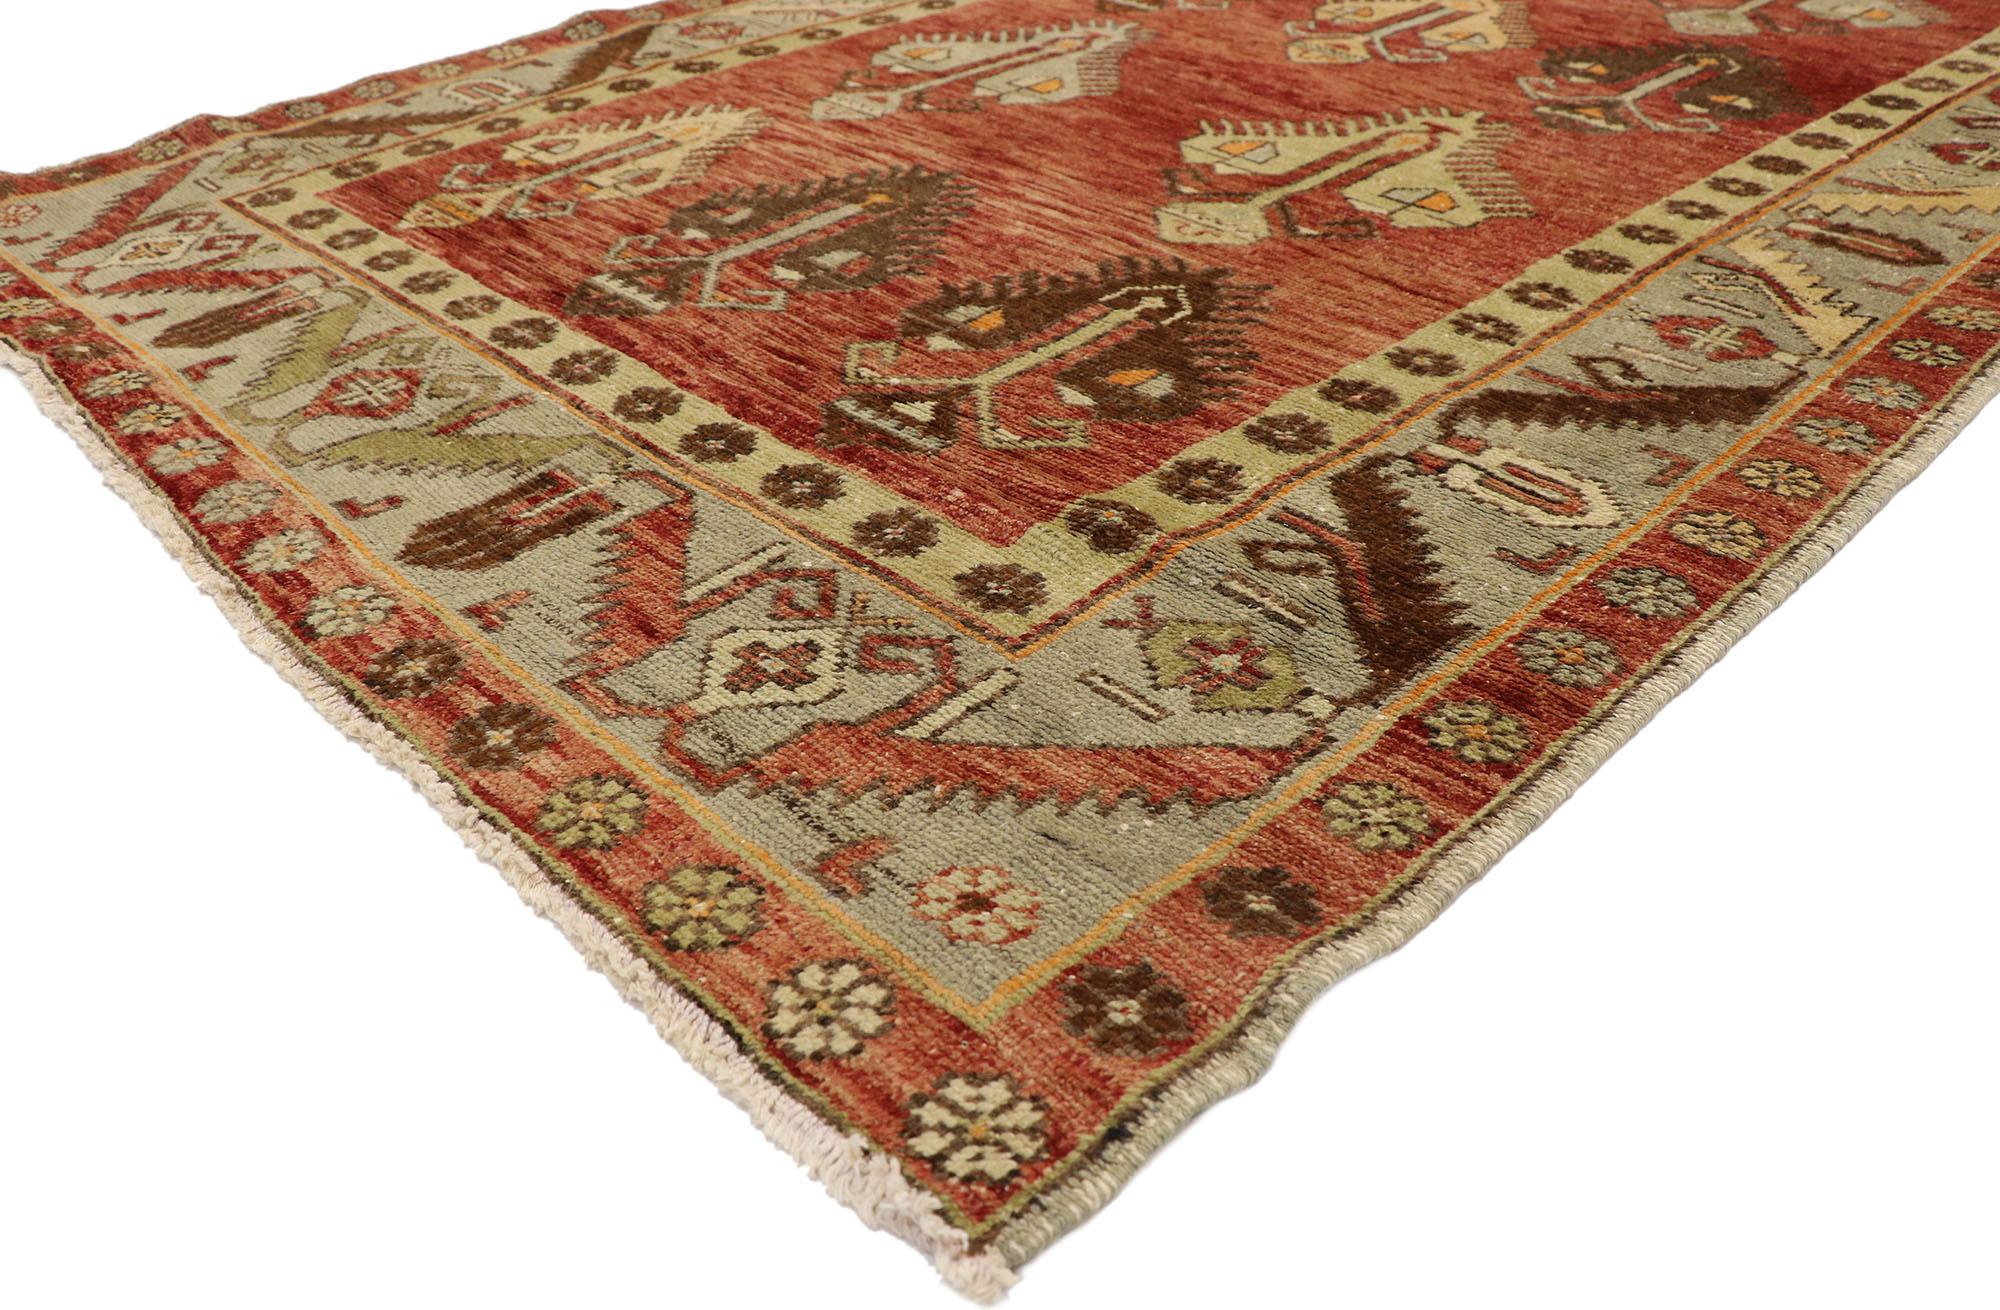 ?50915 Vintage Turkish Oushak runner with Mid-Century Modern style, extra-long hallway runner. With its bold geometric design and stately appeal, this hand-knotted wool vintage Turkish Oushak runner beautifully embodies Mid-Century Modern style. It